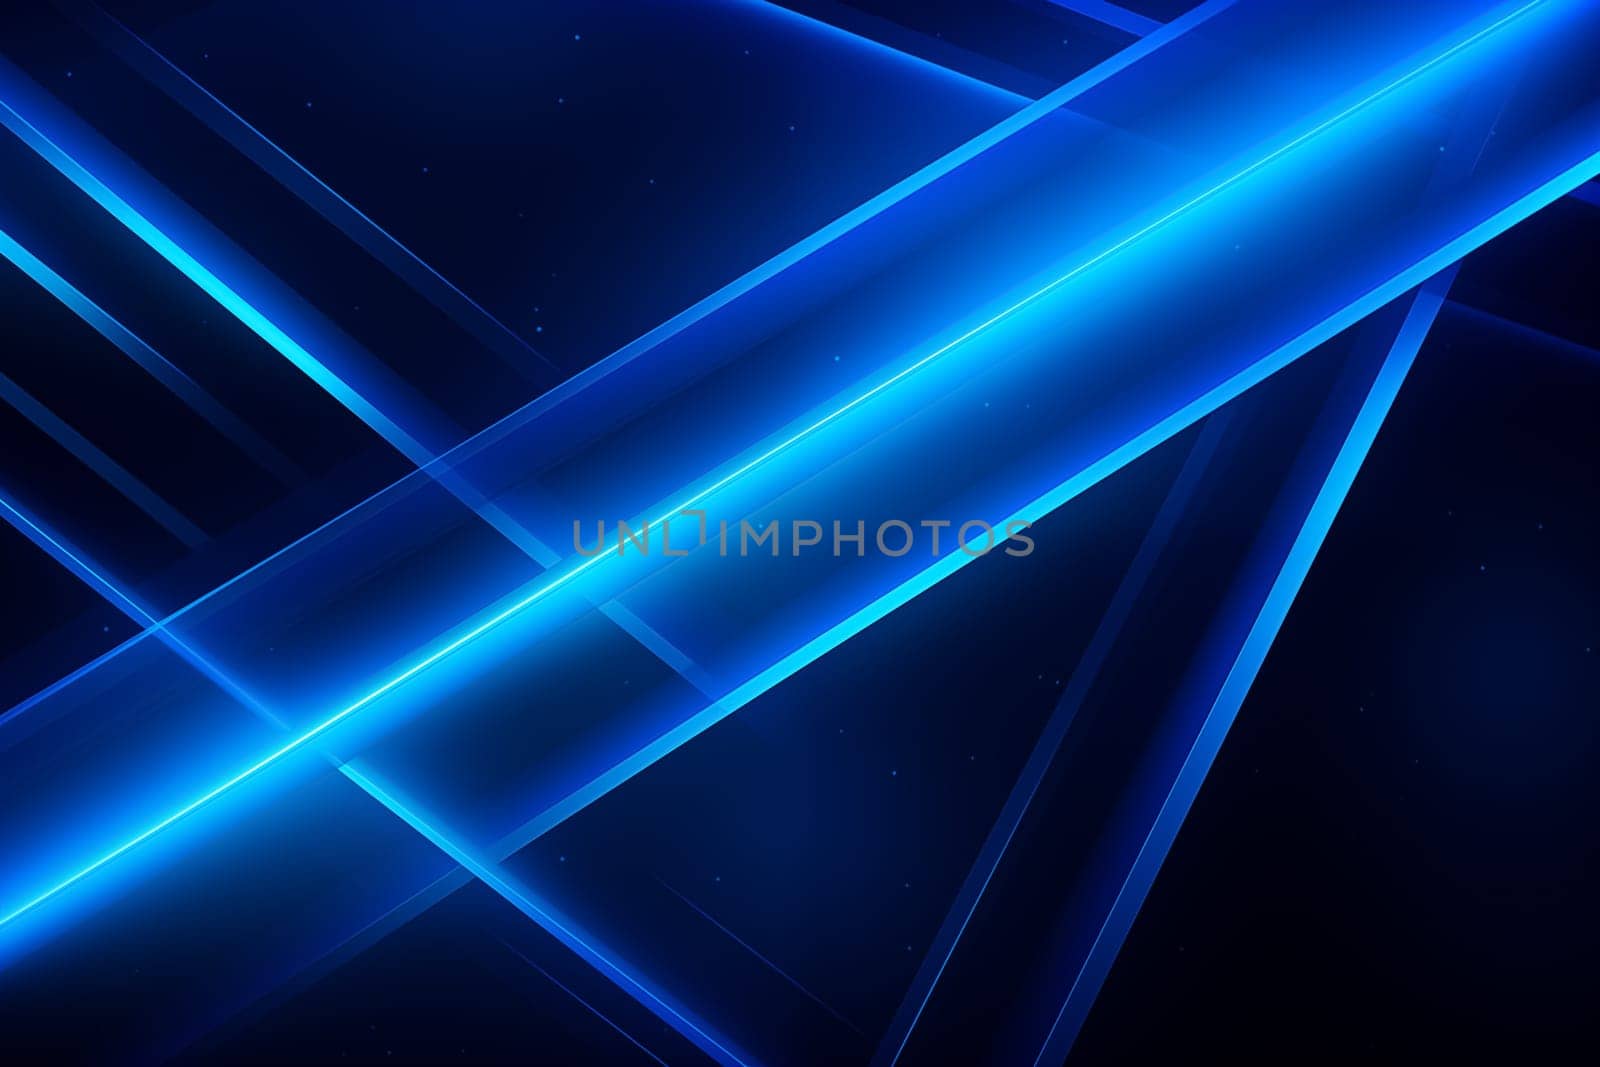 Blue abstract background with blue glowing geometric lines. Modern shiny blue diagonal rounded lines pattern. Futuristic technology concept. Suit for poster, banner, brochure, corporate, website by Nadtochiy